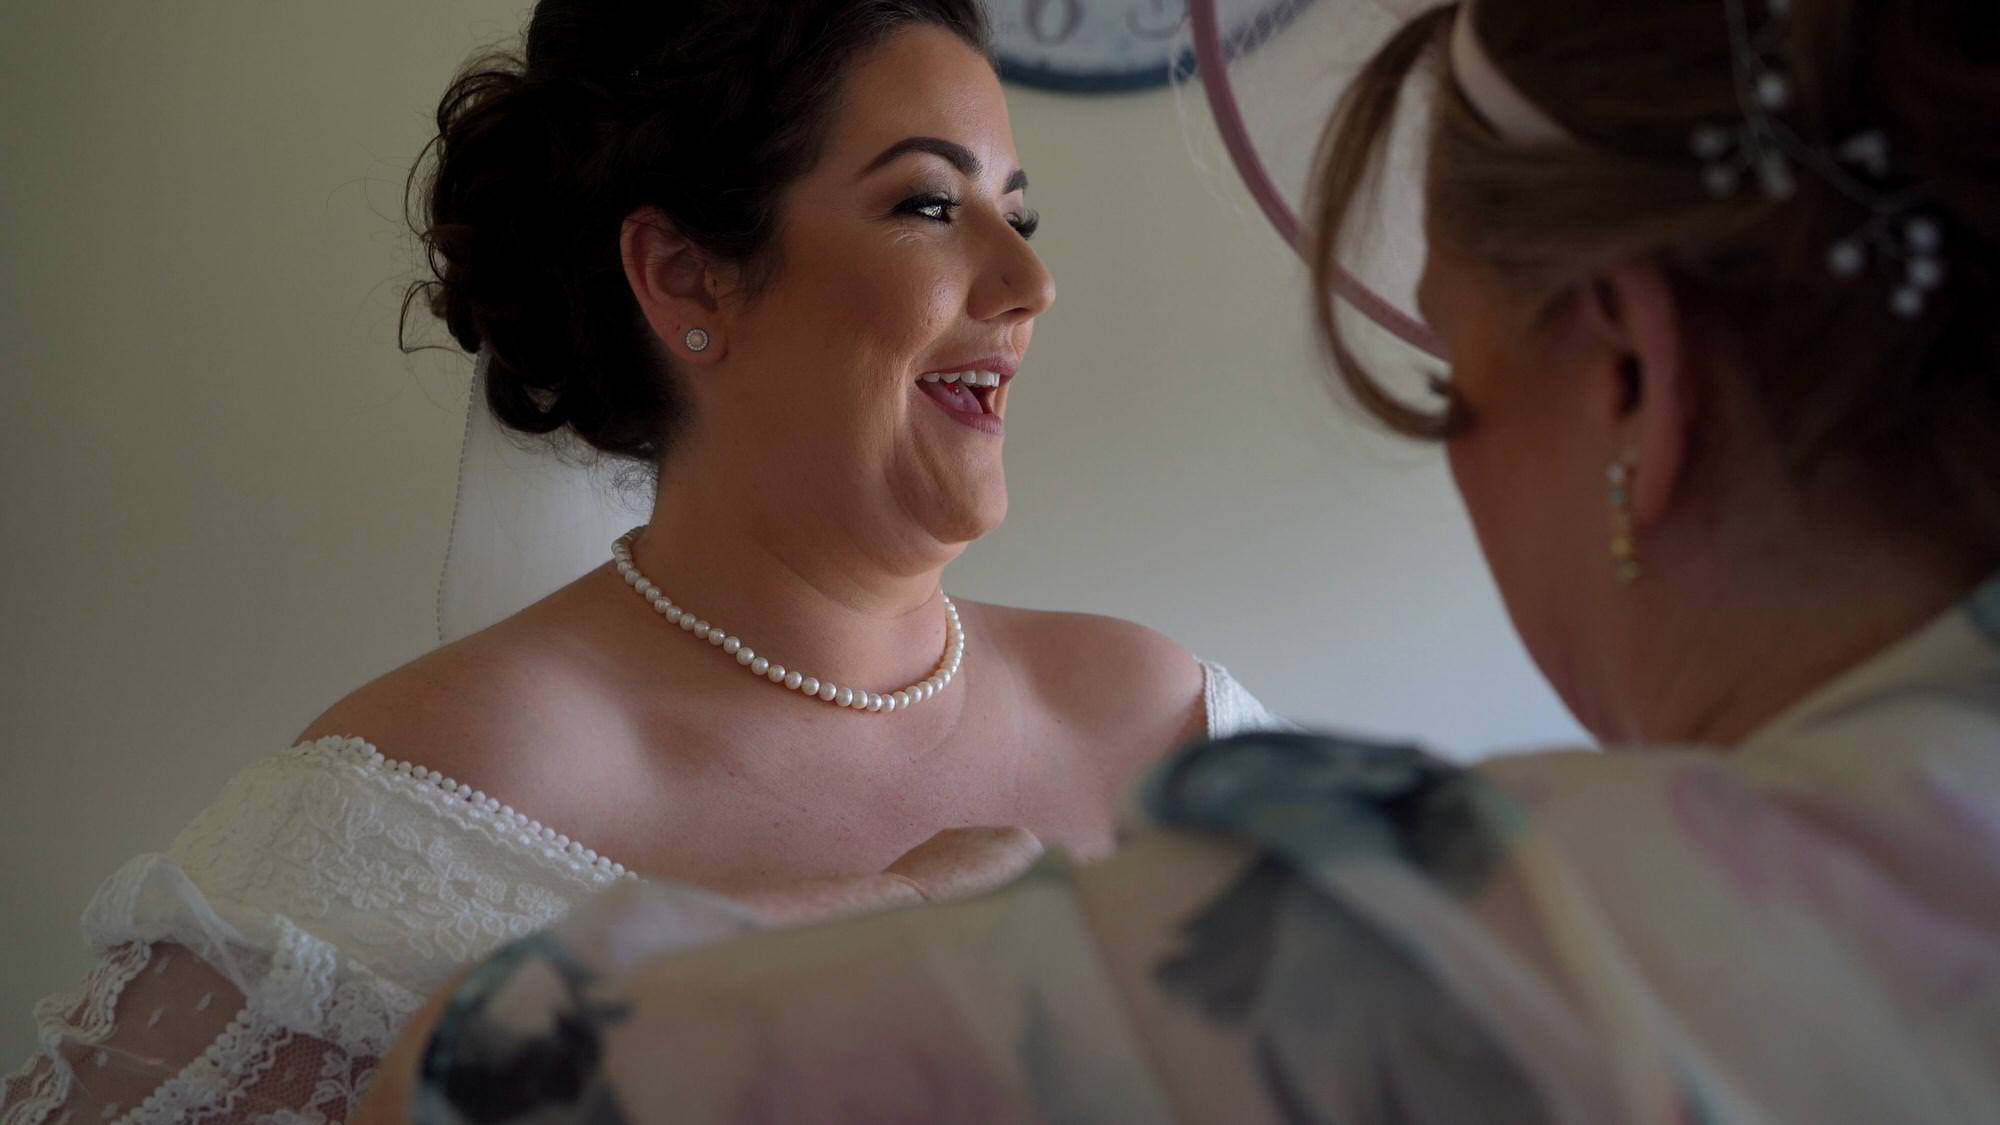 a Mum helps her daughter get dressed on her wedding morning